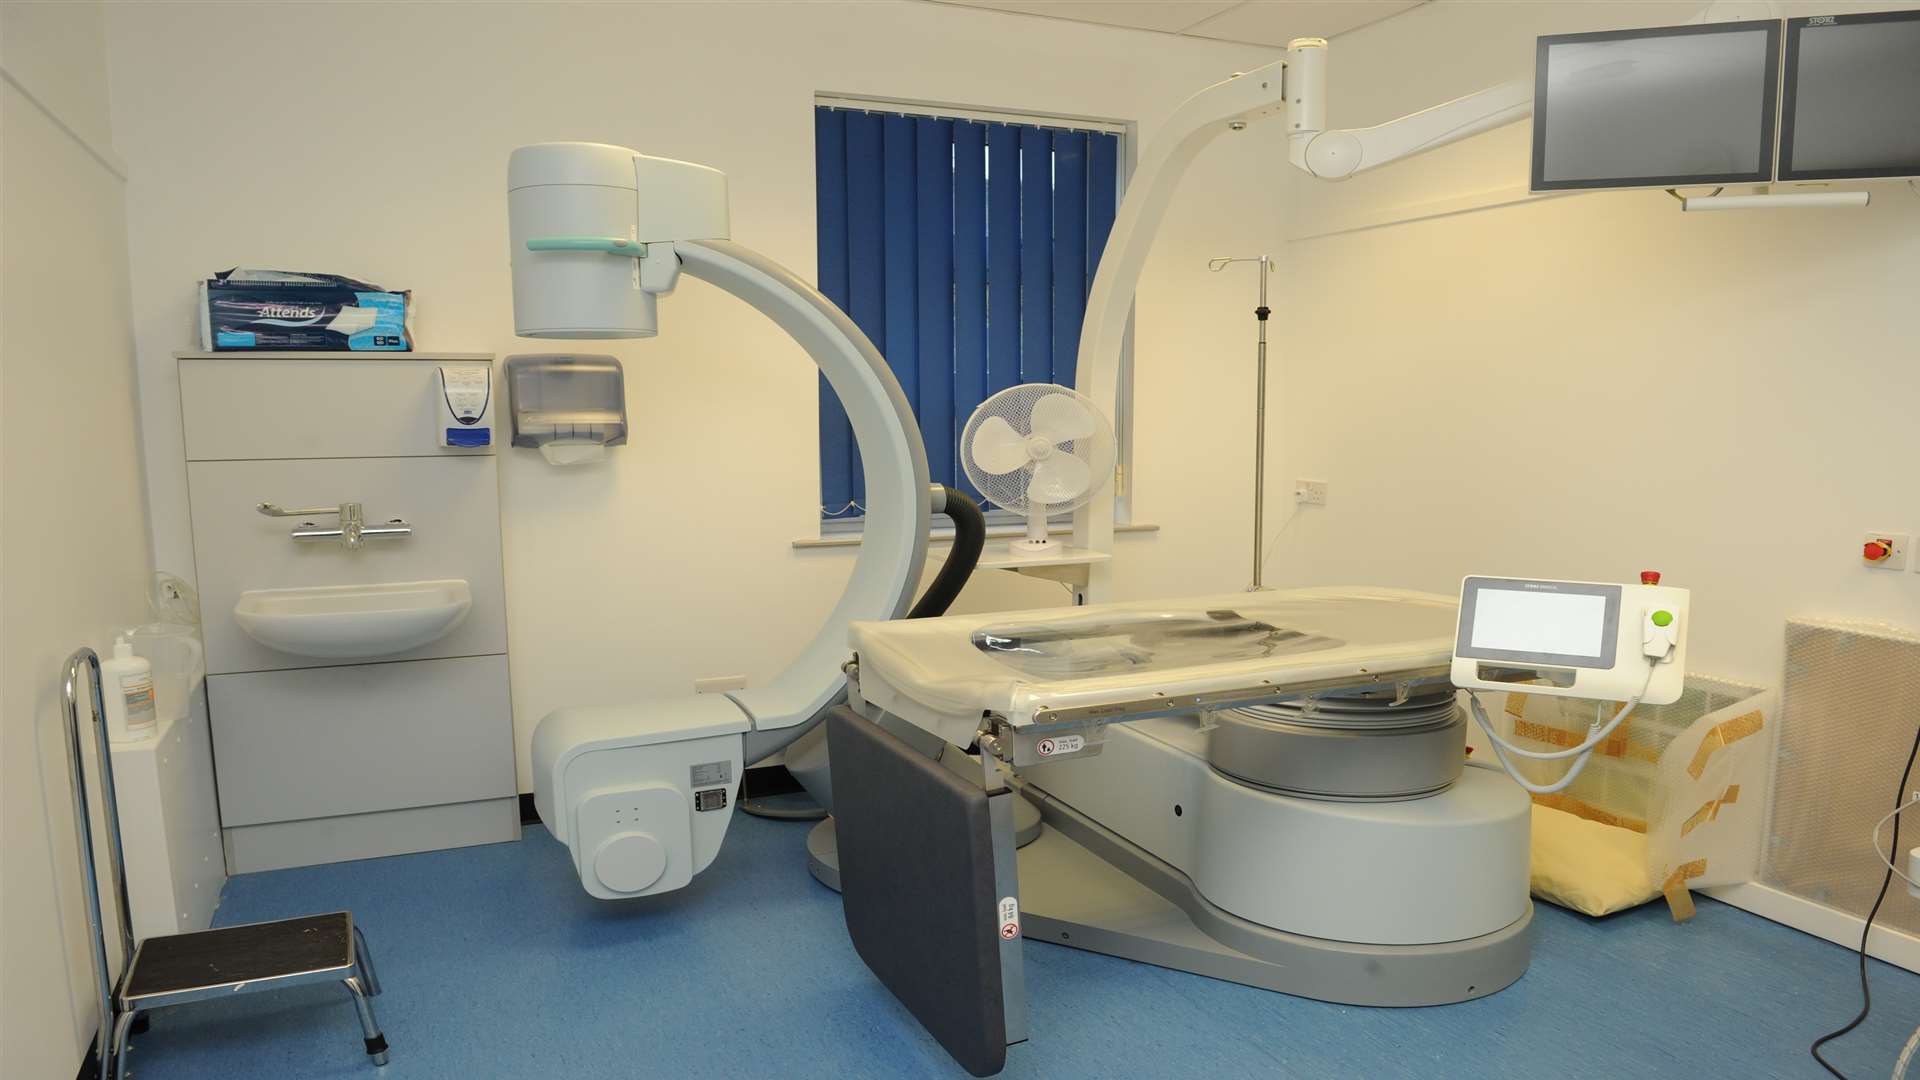 The Lithotripter at Darent Valley Hospital